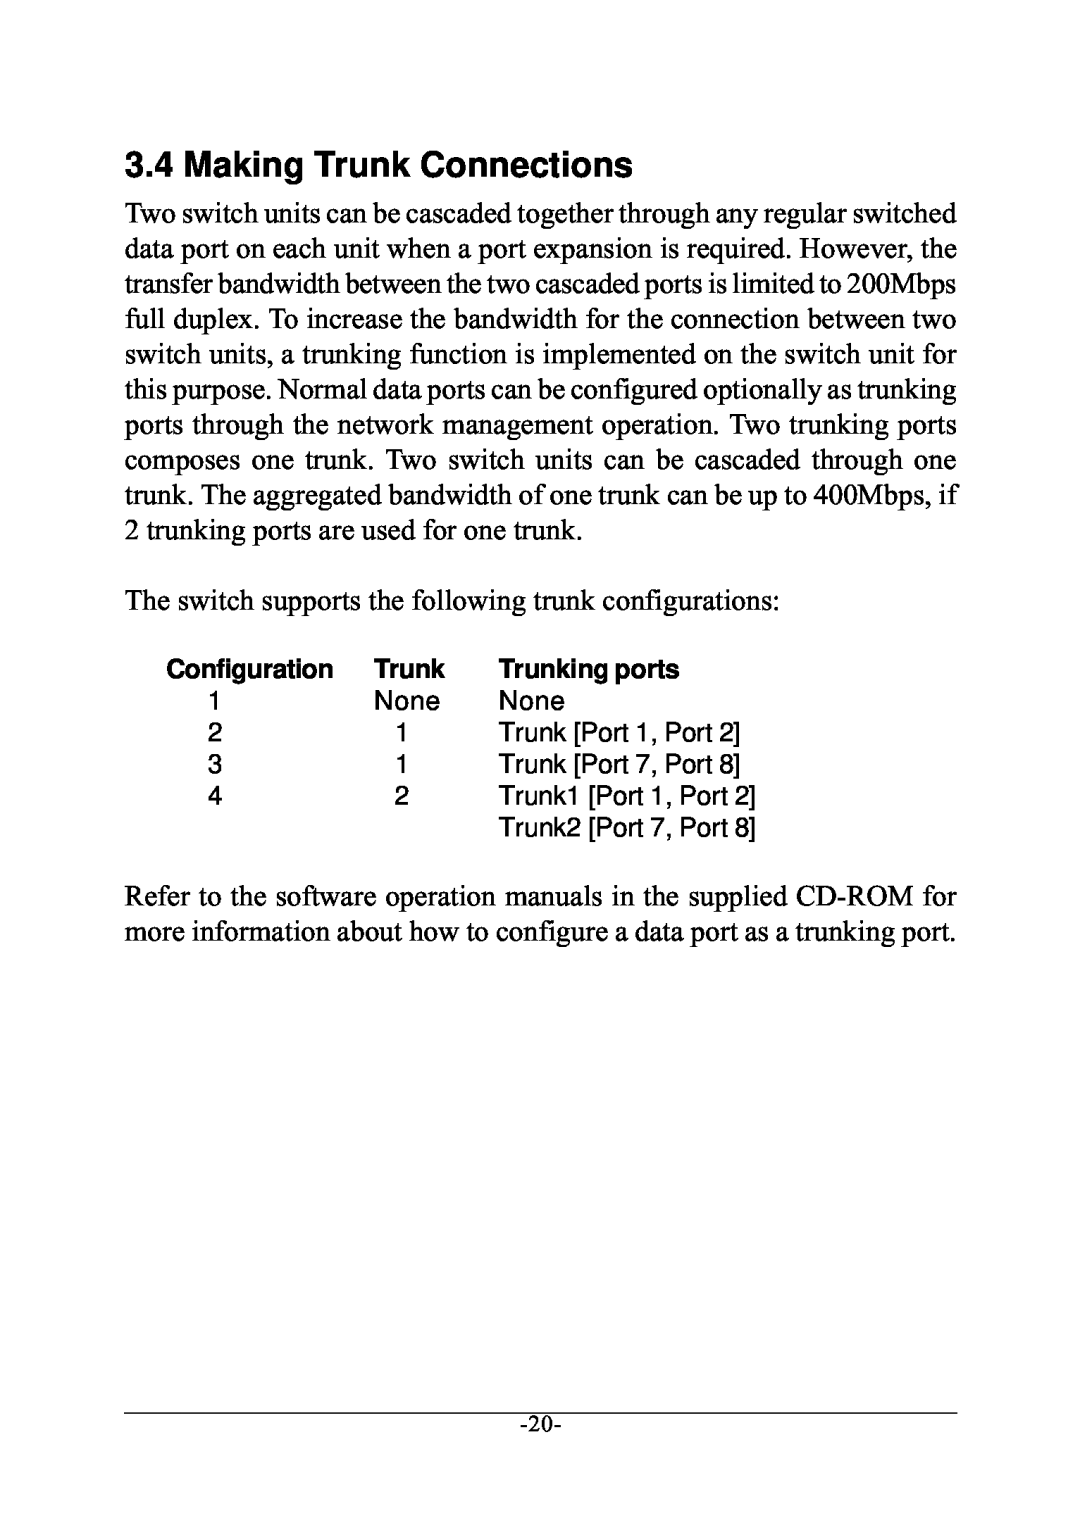 KTI Networks KS-801 manual Making Trunk Connections, The switch supports the following trunk configurations, Configuration 